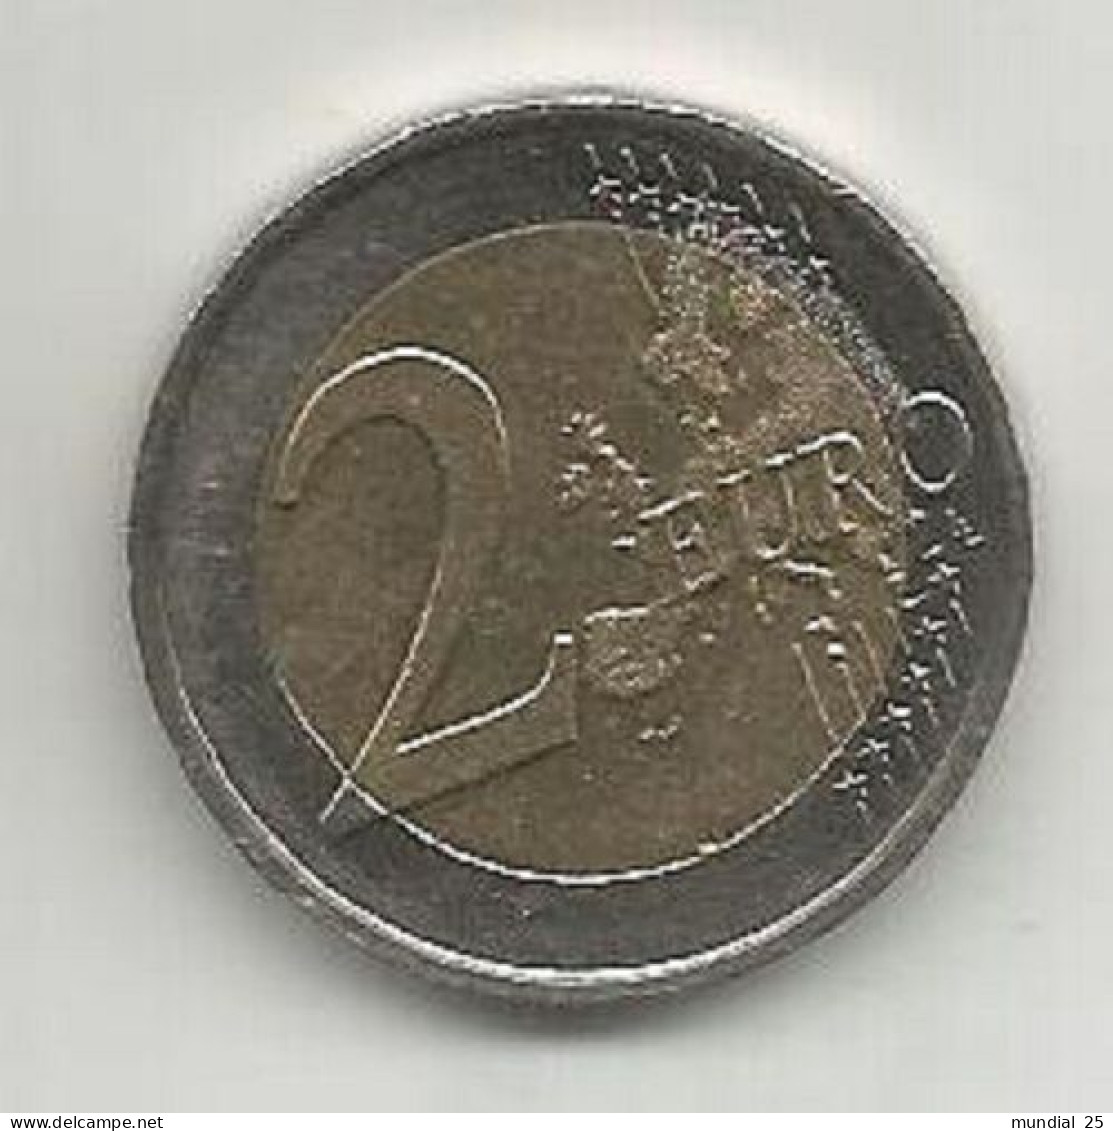 NETHERLANDS 2 EURO 2013 - ABDICATION OF QUEEN BEATRIX - Pays-Bas